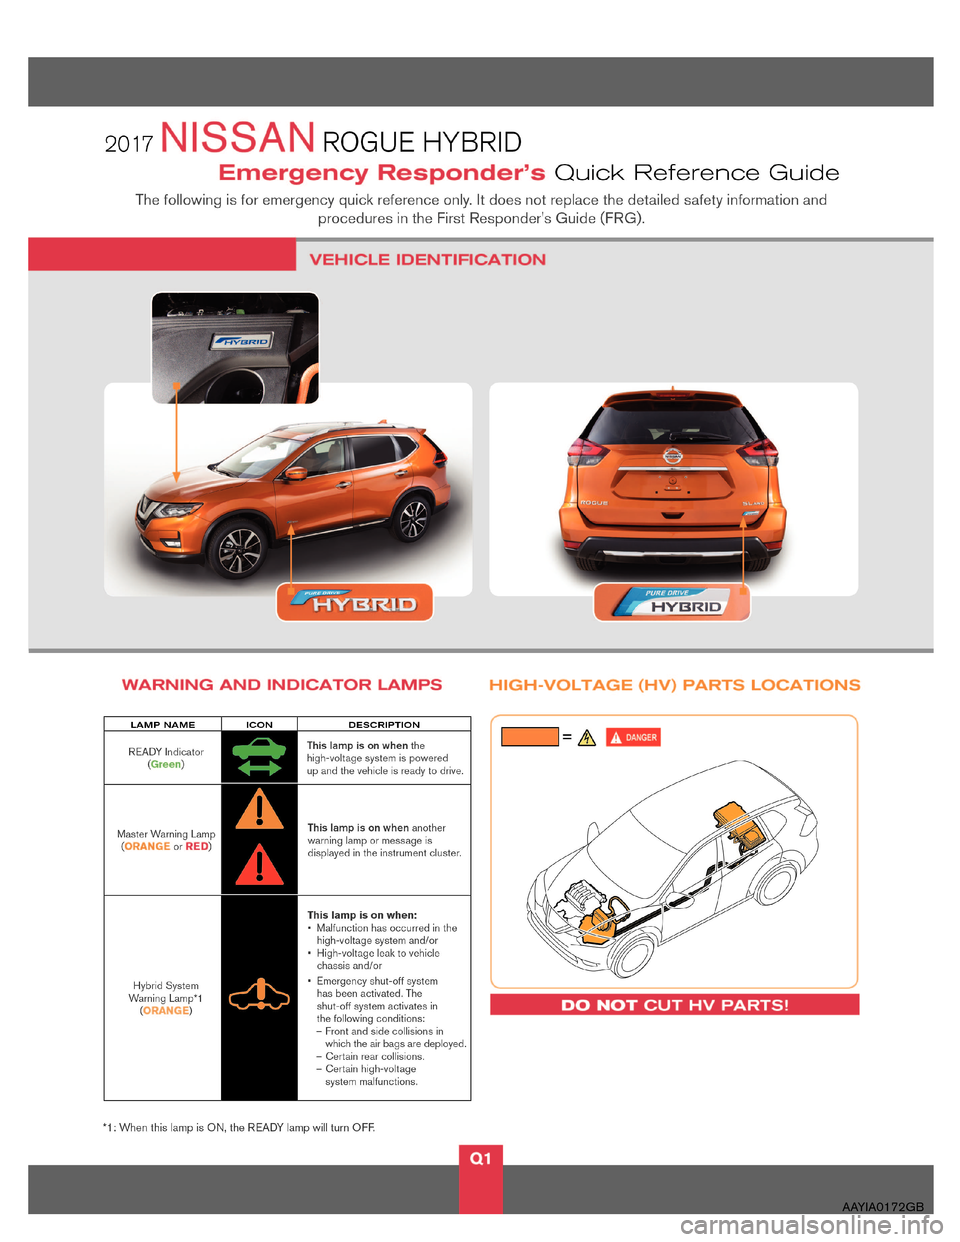 NISSAN ROGUE HYBRID 2017 2.G First Responders Guide AAYIA0172GB  